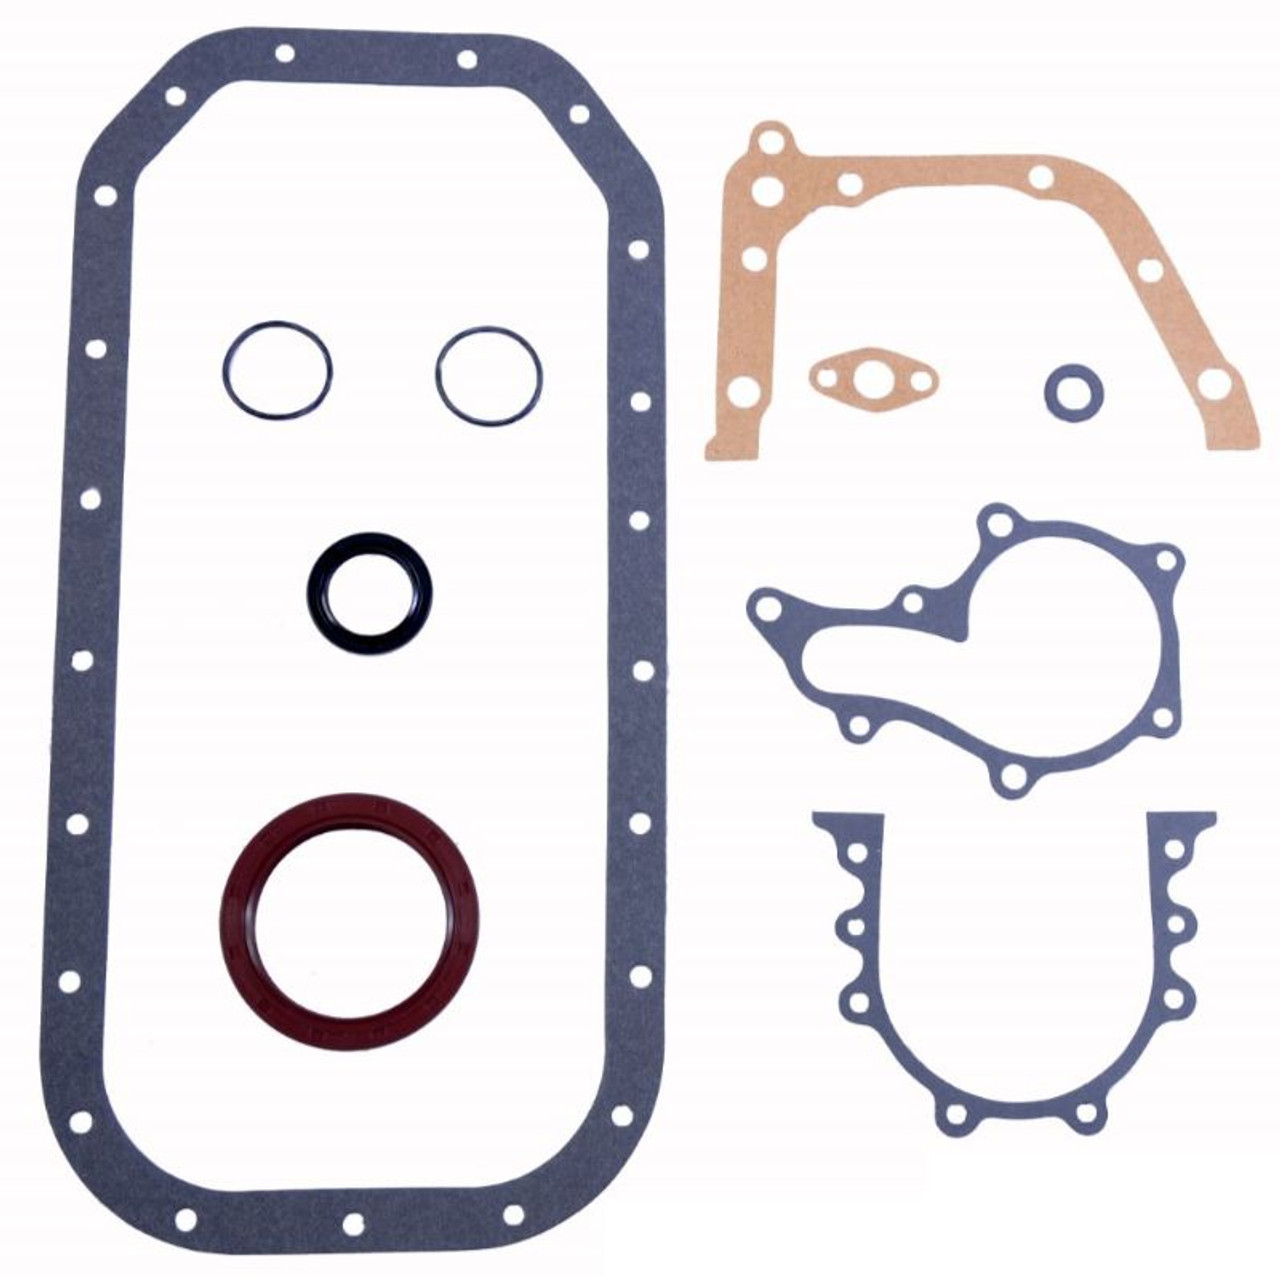 1985 Toyota Corolla 1.6L Engine Lower Gasket Set TO1.6CS-A -1